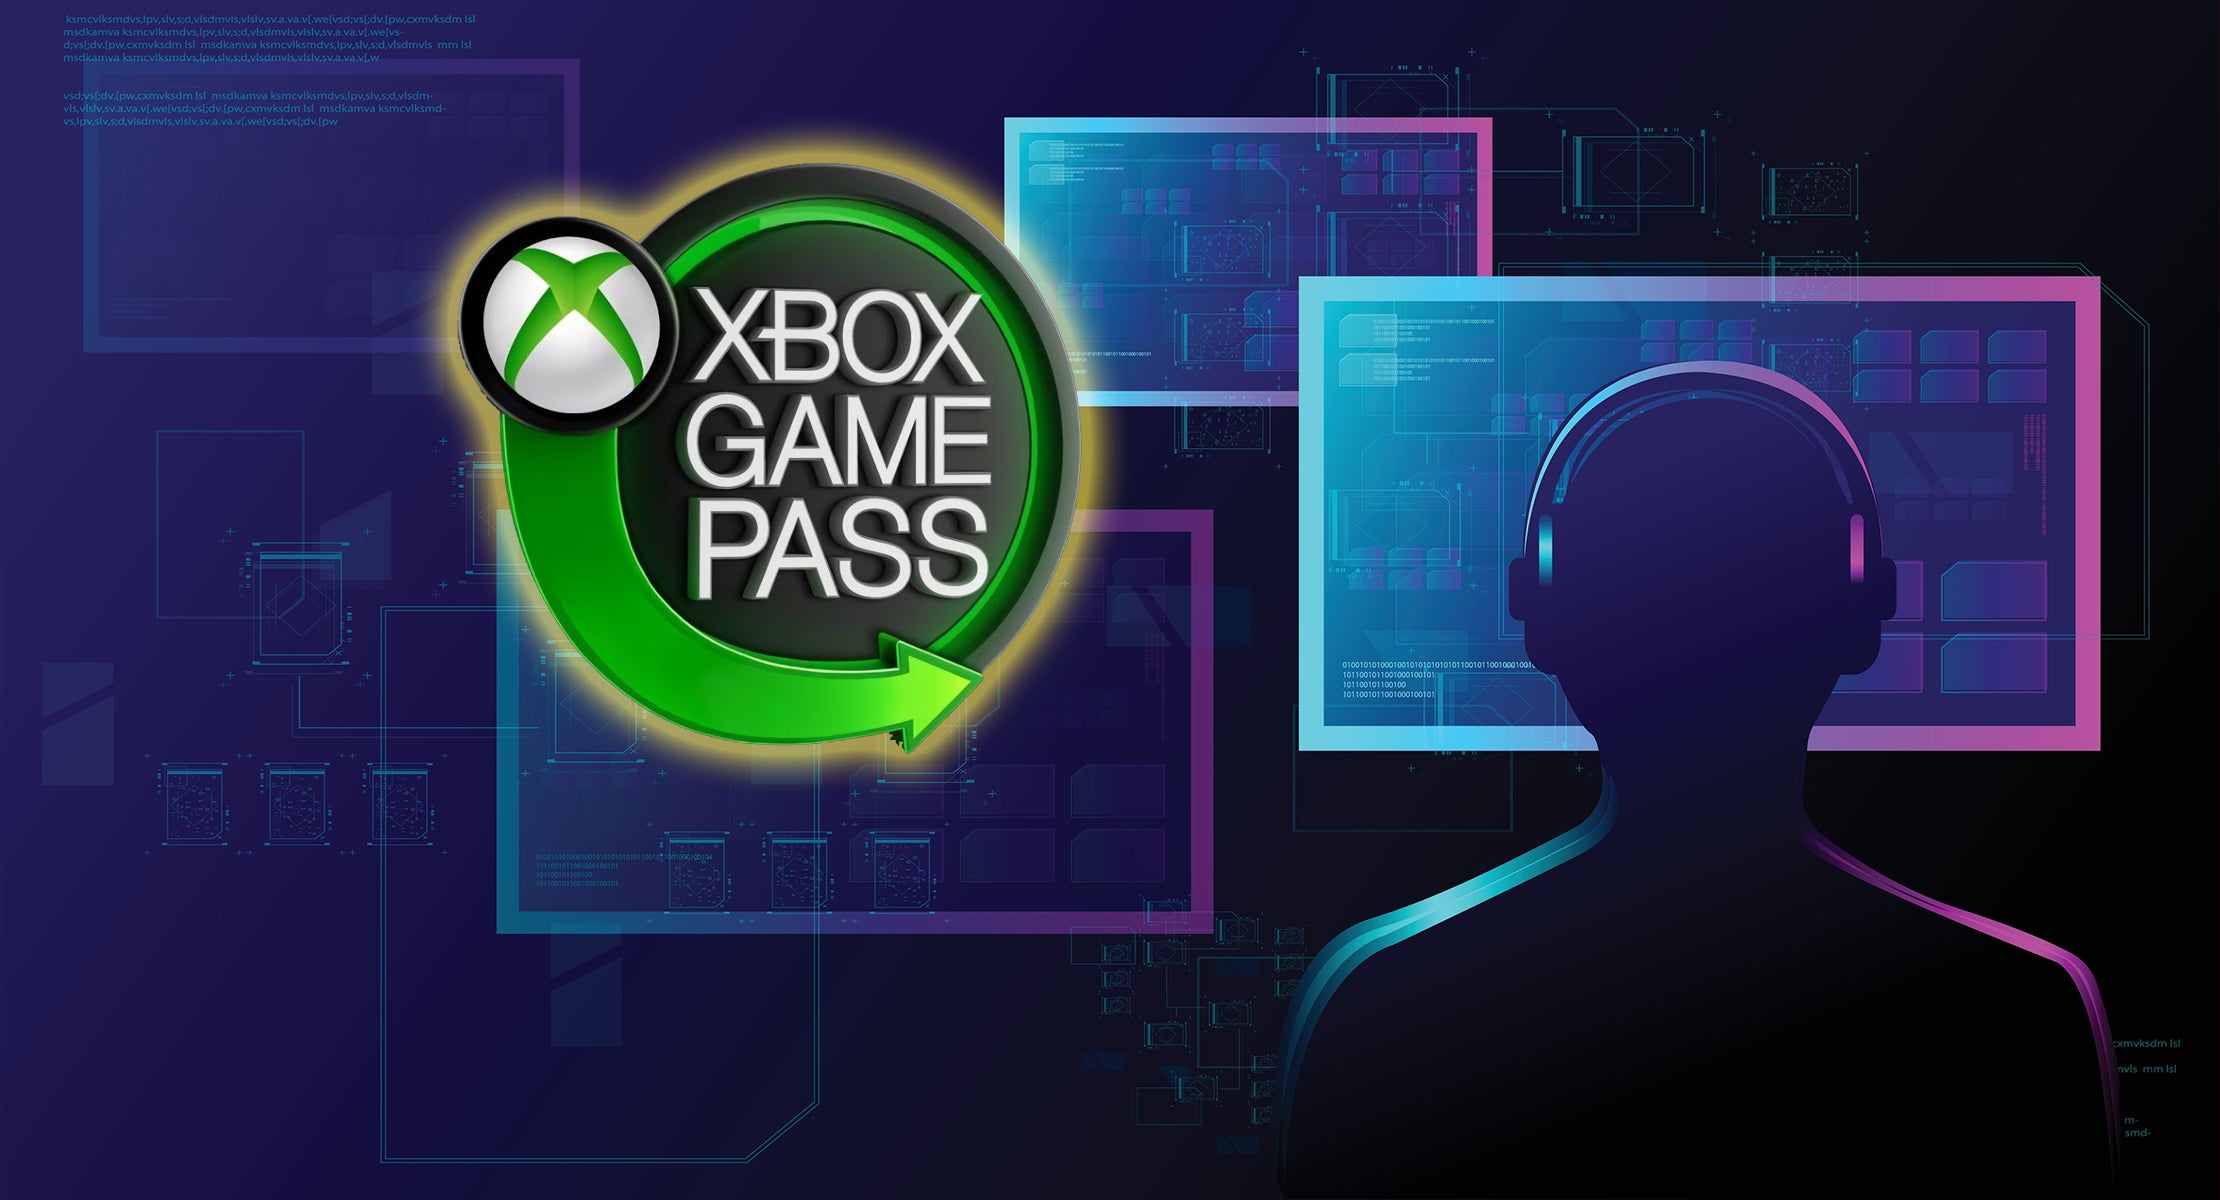 Lies of P, Payday 3, and Gotham Knights are all coming to the Xbox